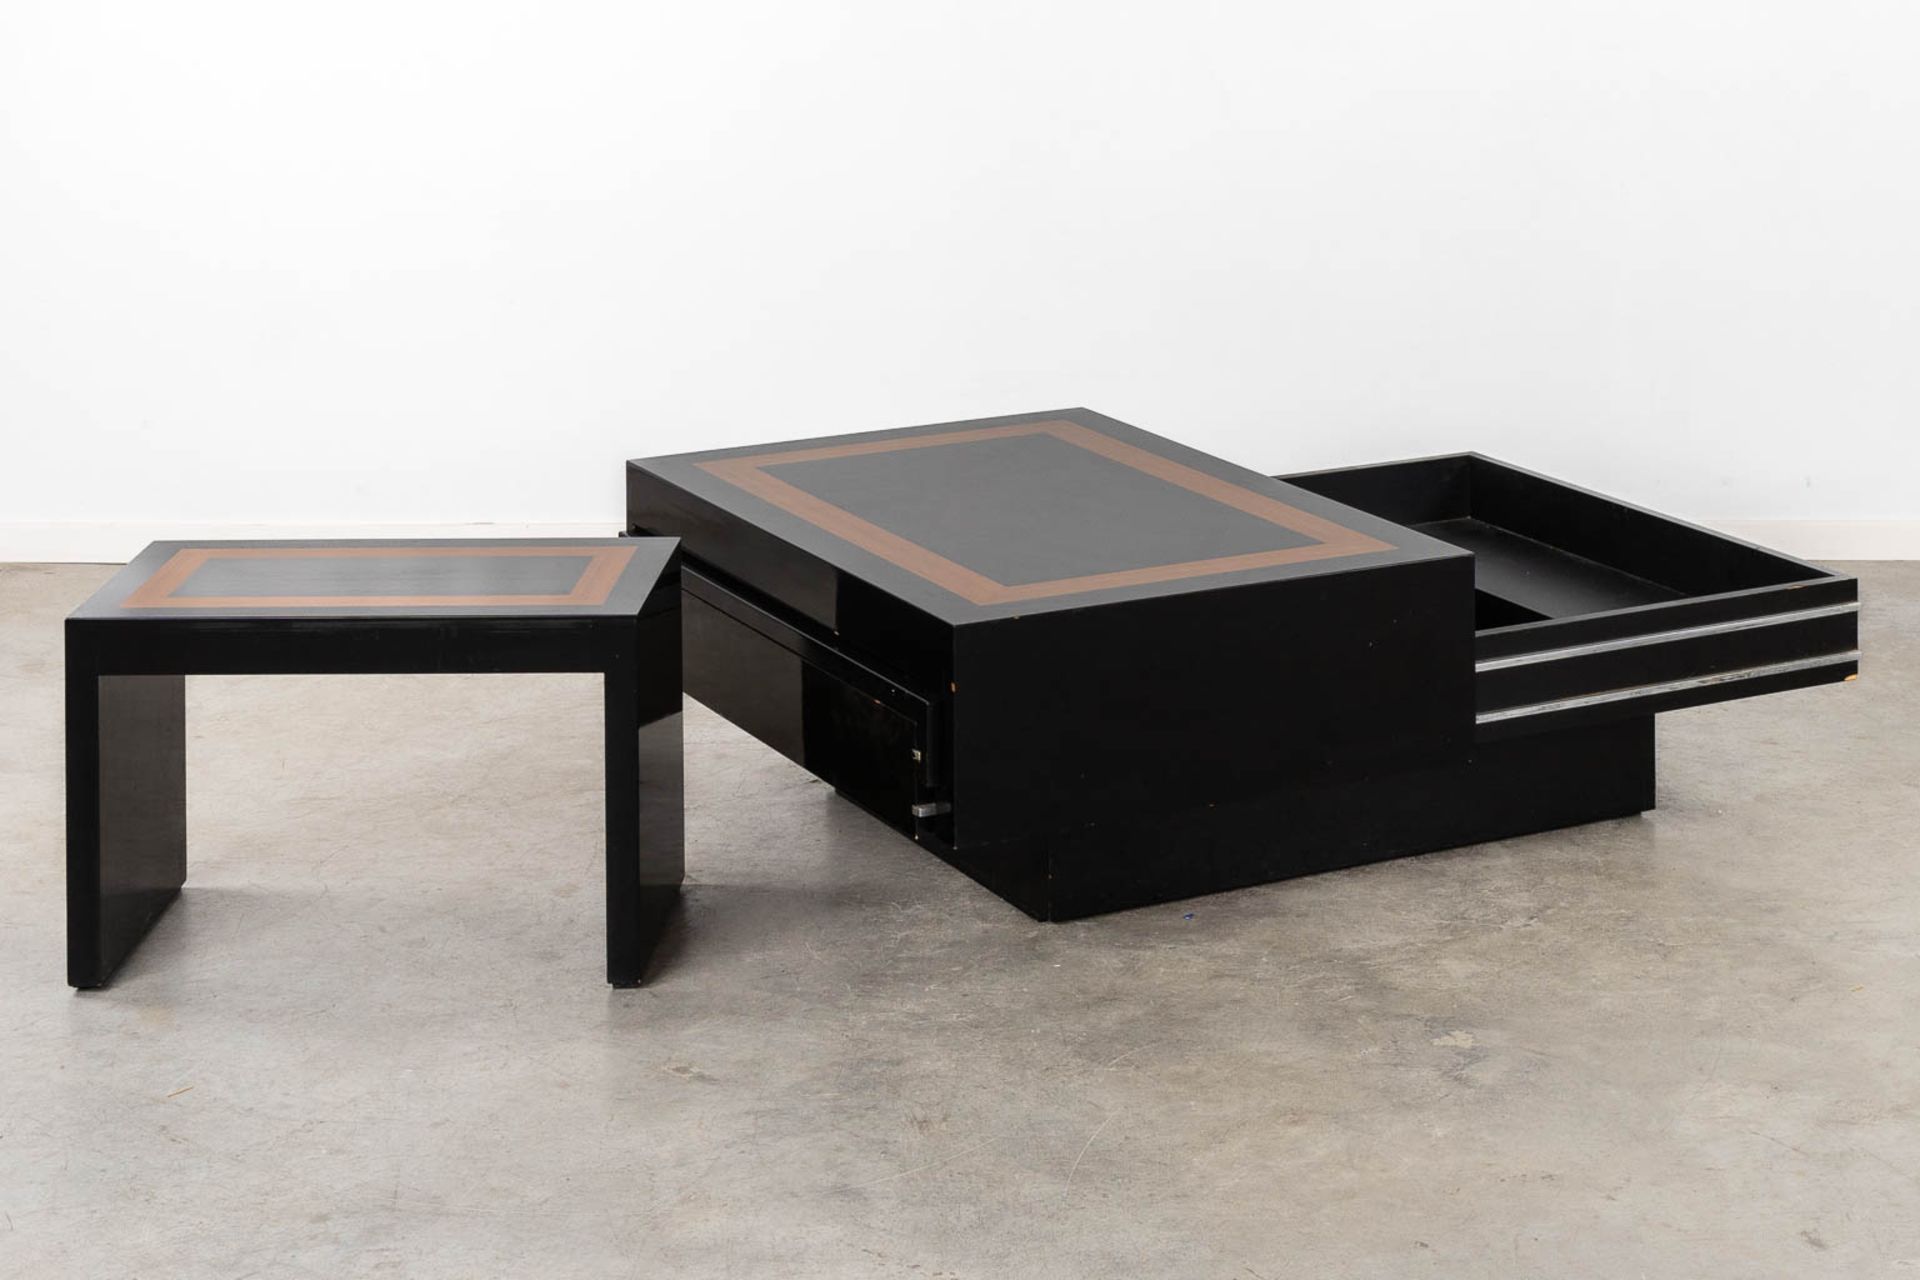 A slideable coffee table, added a bench. Lacquered wood. (L:110 x W:145 x H:47 cm) - Image 5 of 9